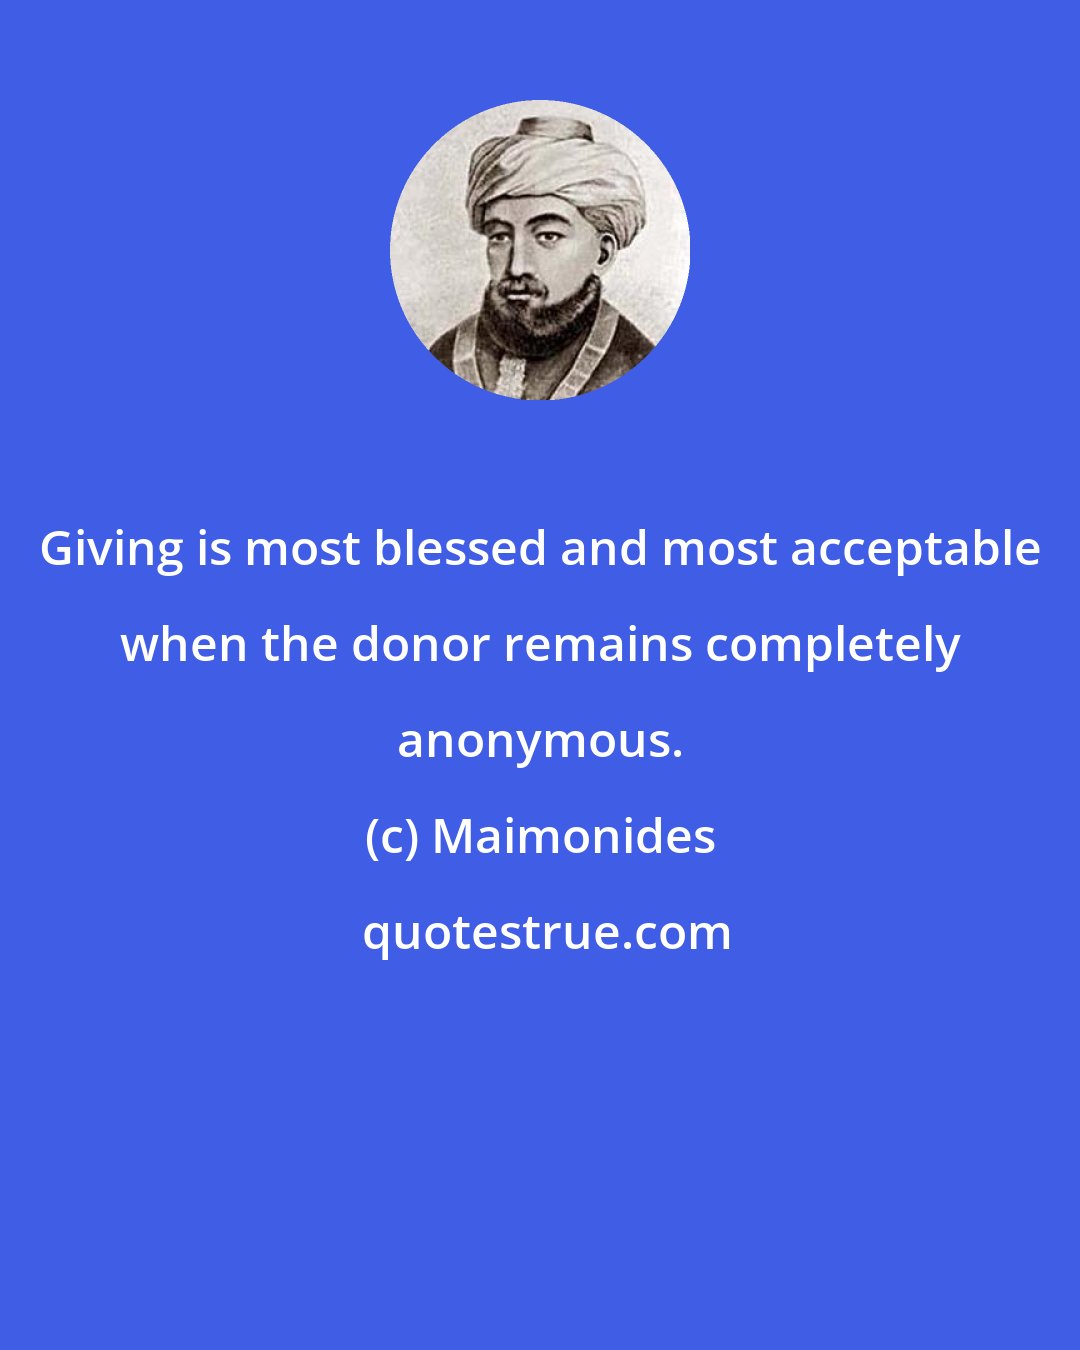 Maimonides: Giving is most blessed and most acceptable when the donor remains completely anonymous.